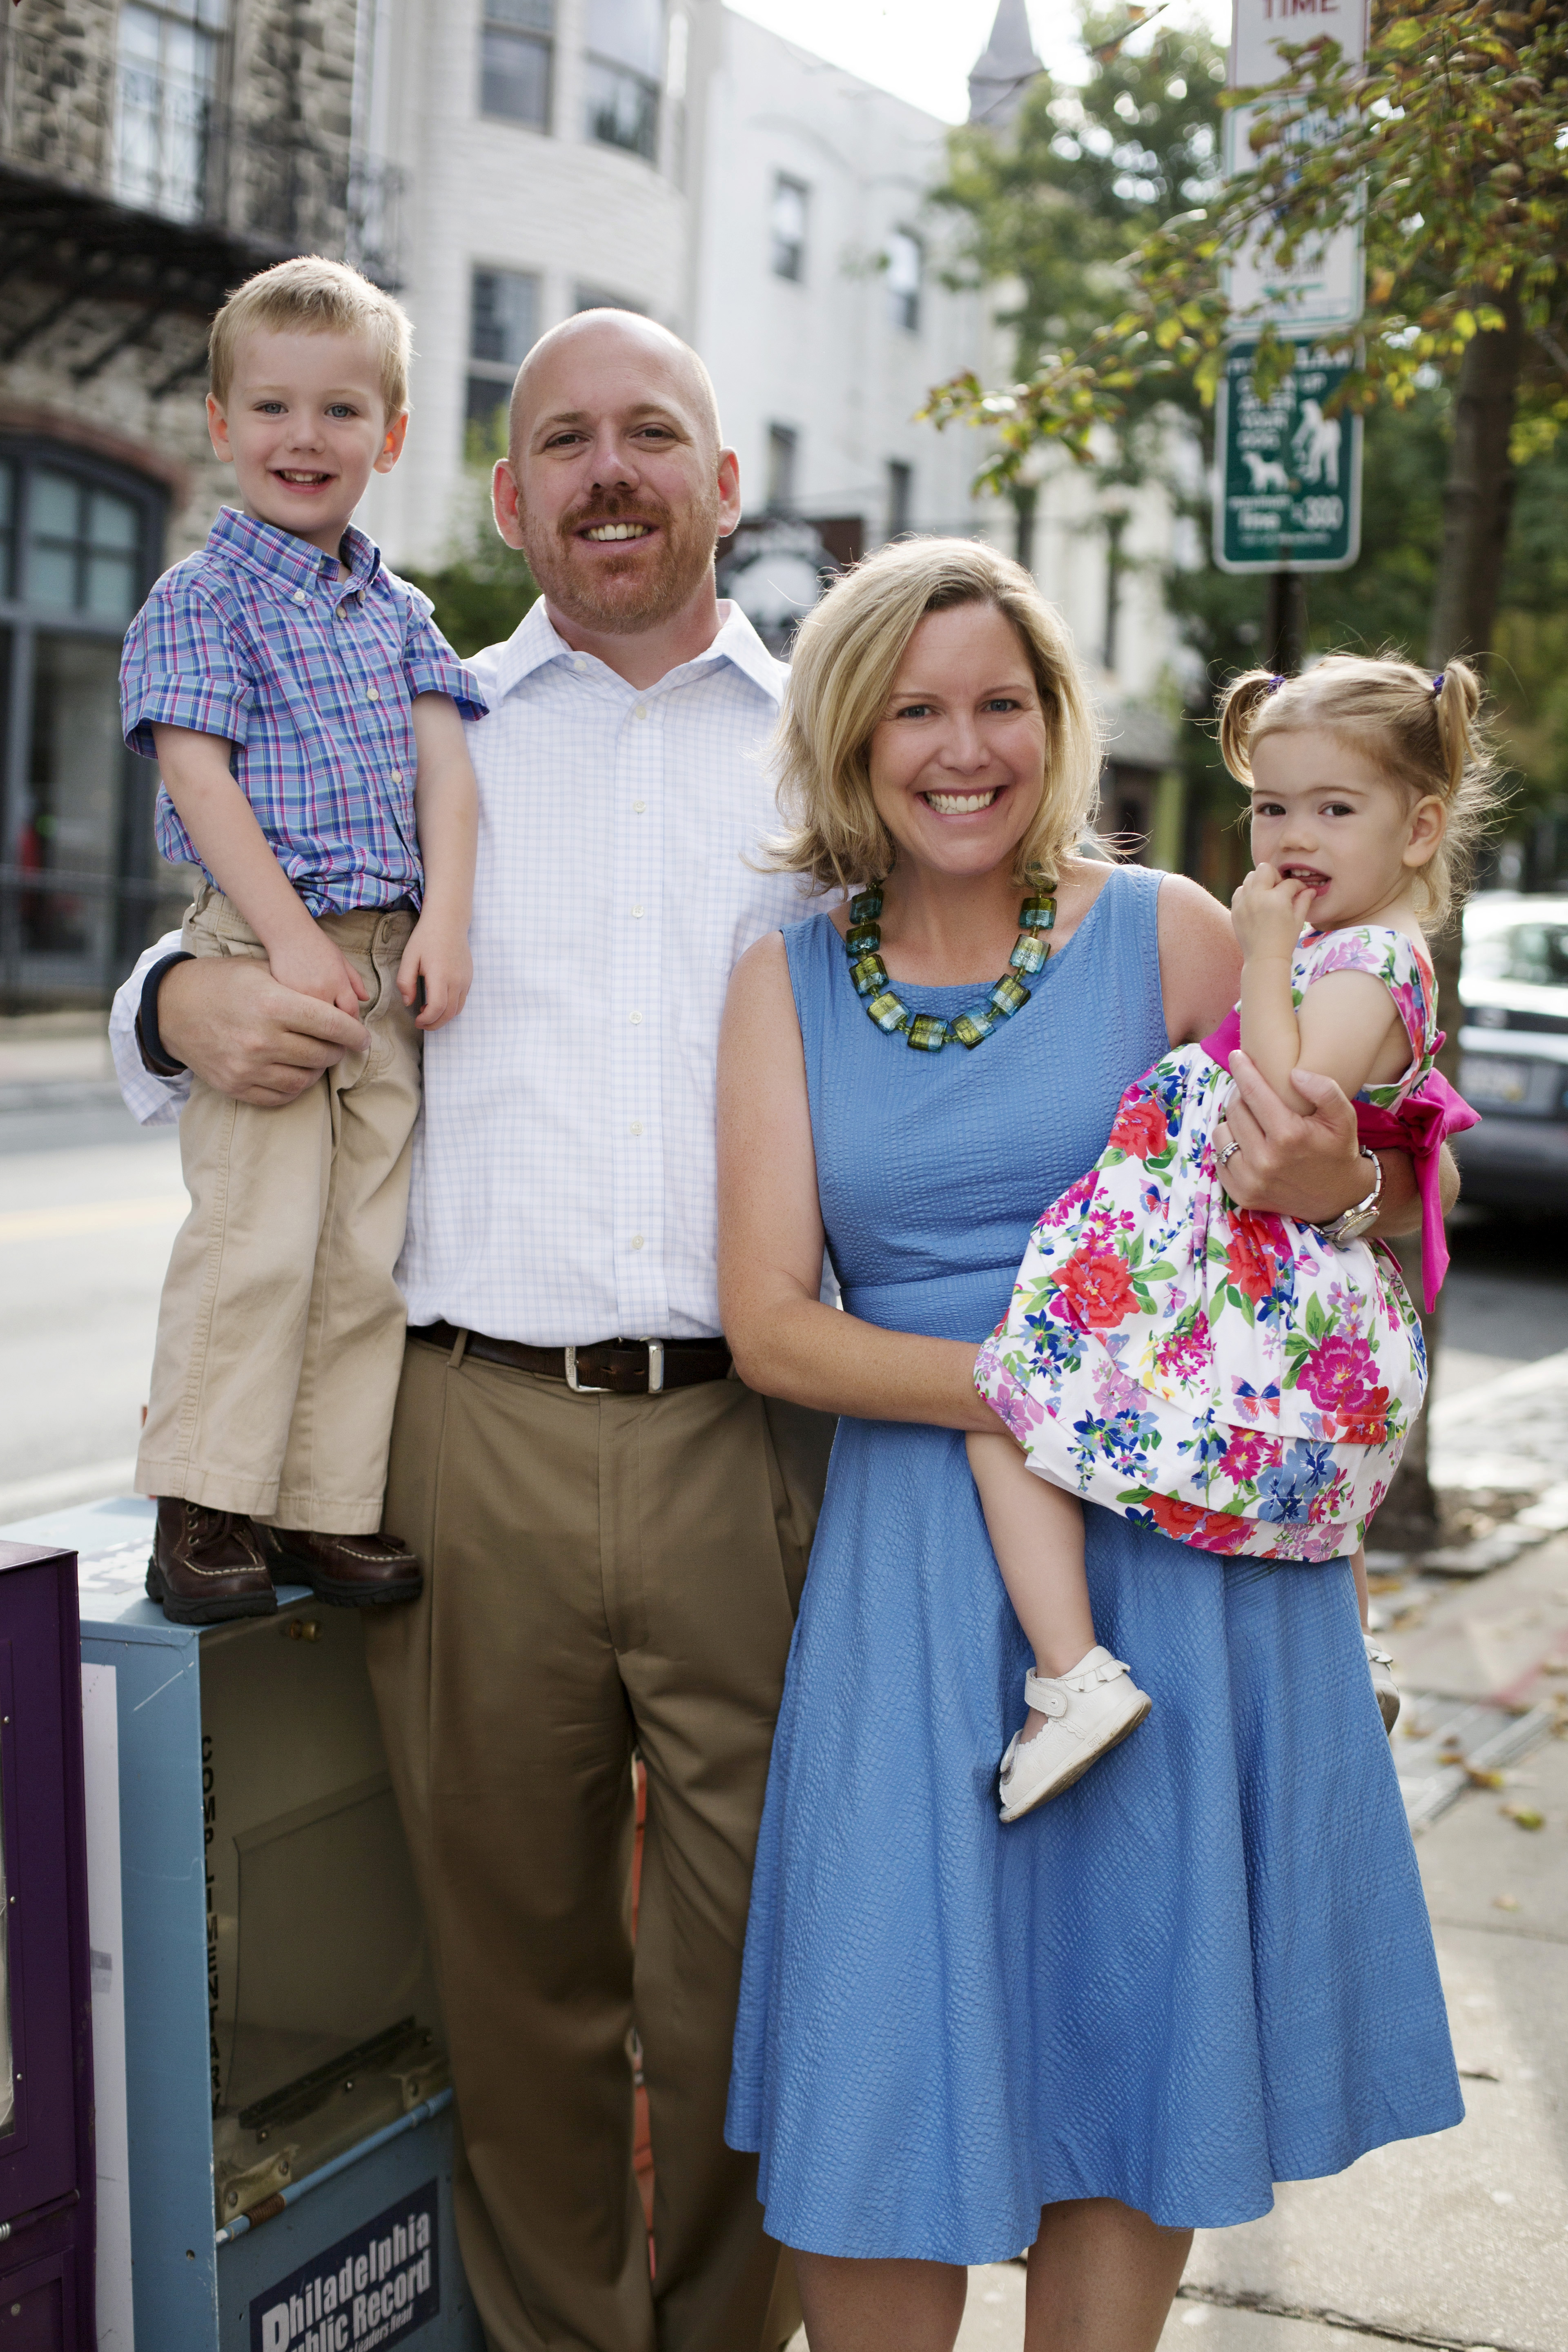 AROUND TOWN The Top Ten Reasons To Raise A Family In Manayunk